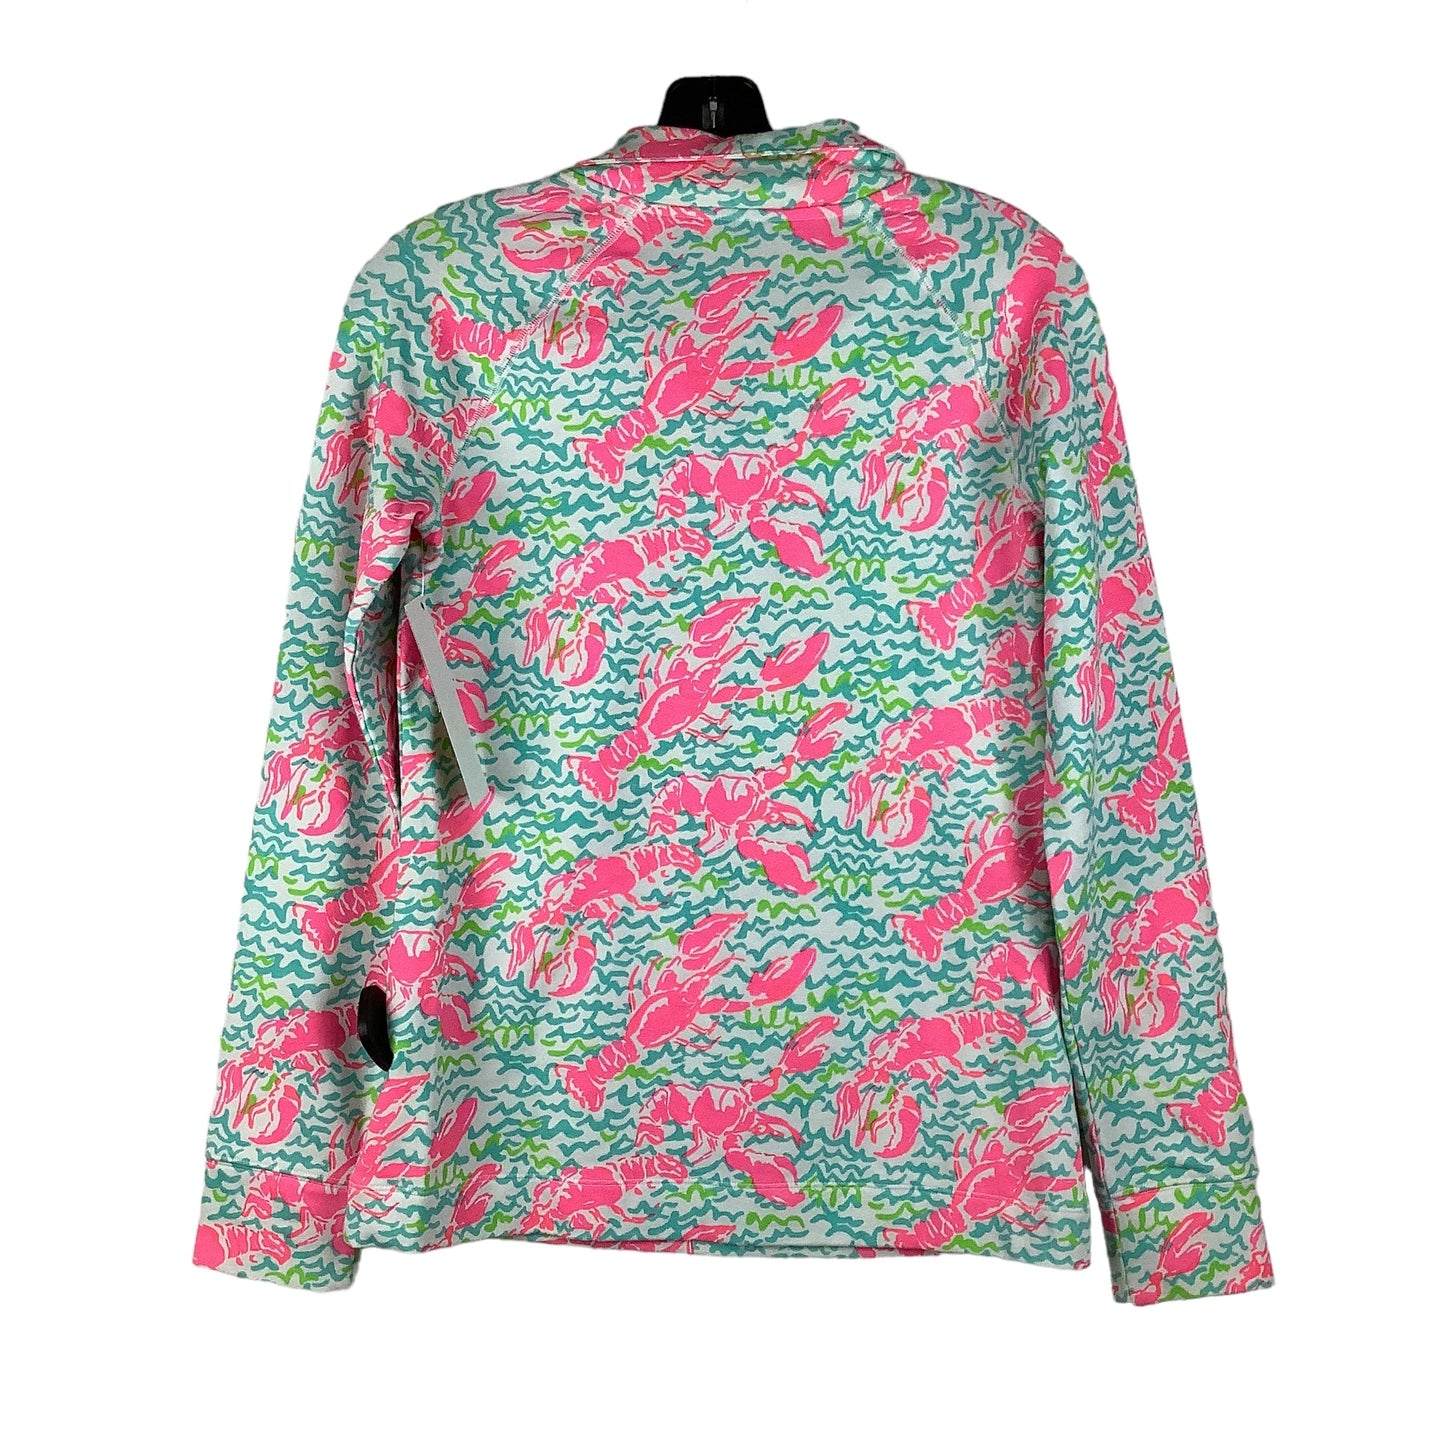 Multi-colored Top Long Sleeve Designer Lilly Pulitzer, Size Xs